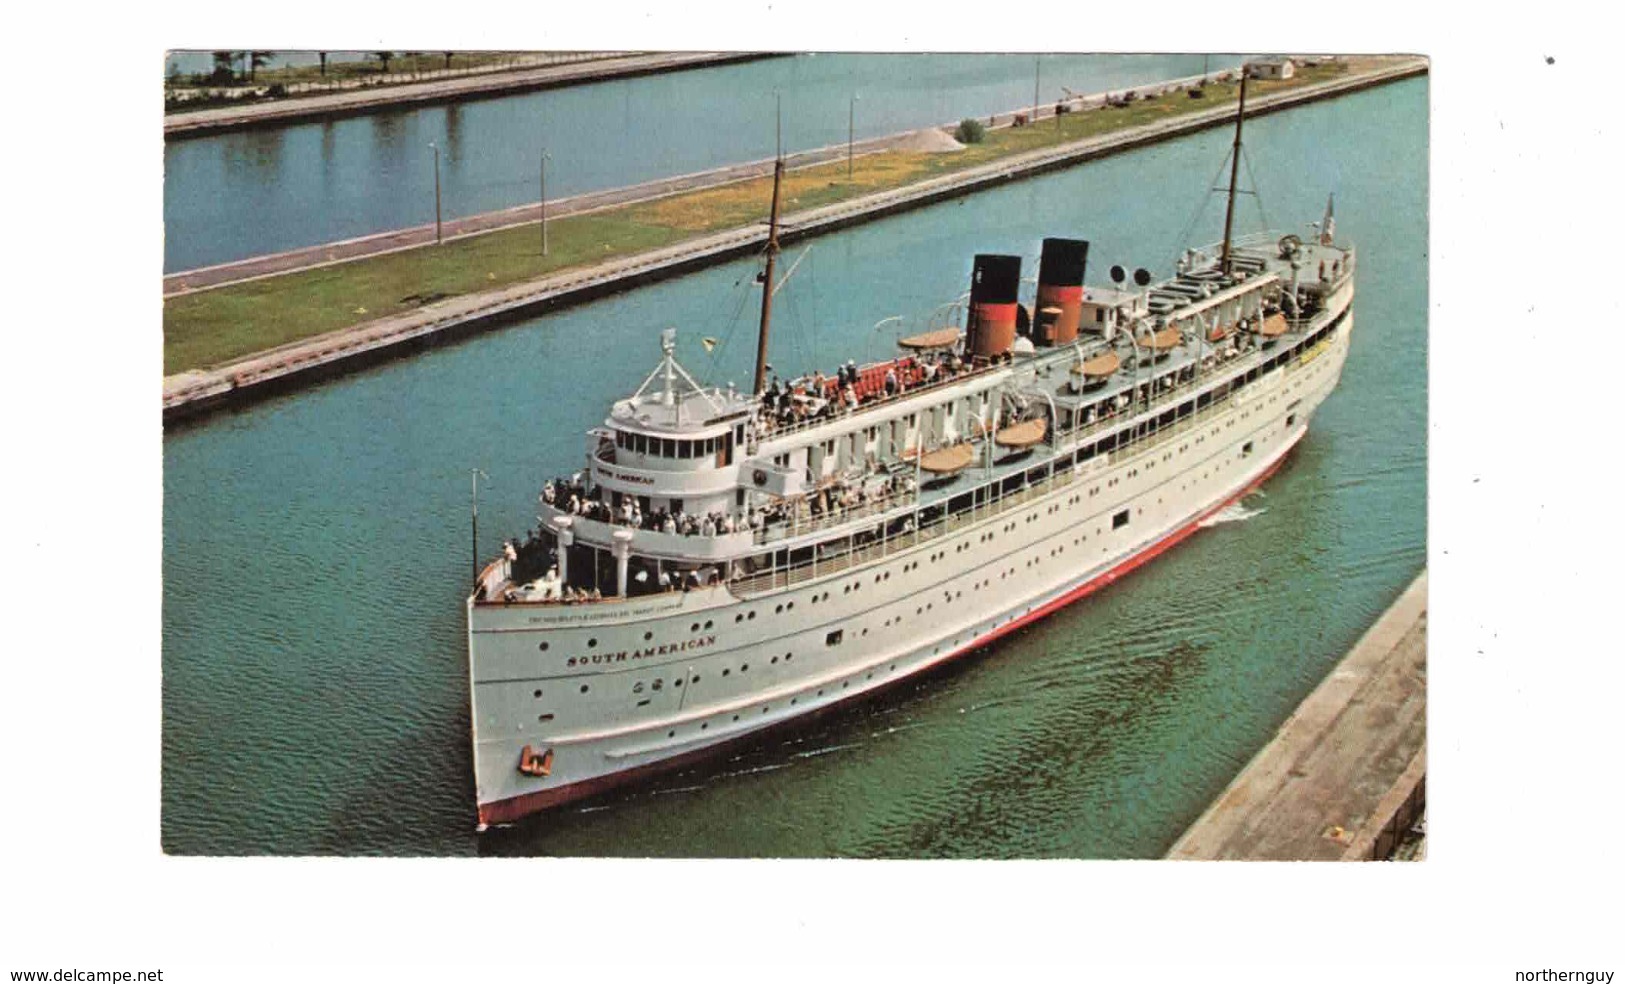 SAULT STE. MARIE, Ontario, Canada, "S. S. South American" Passenger Ship. Great Lakes, Old Chrome Postcard - Peterborough